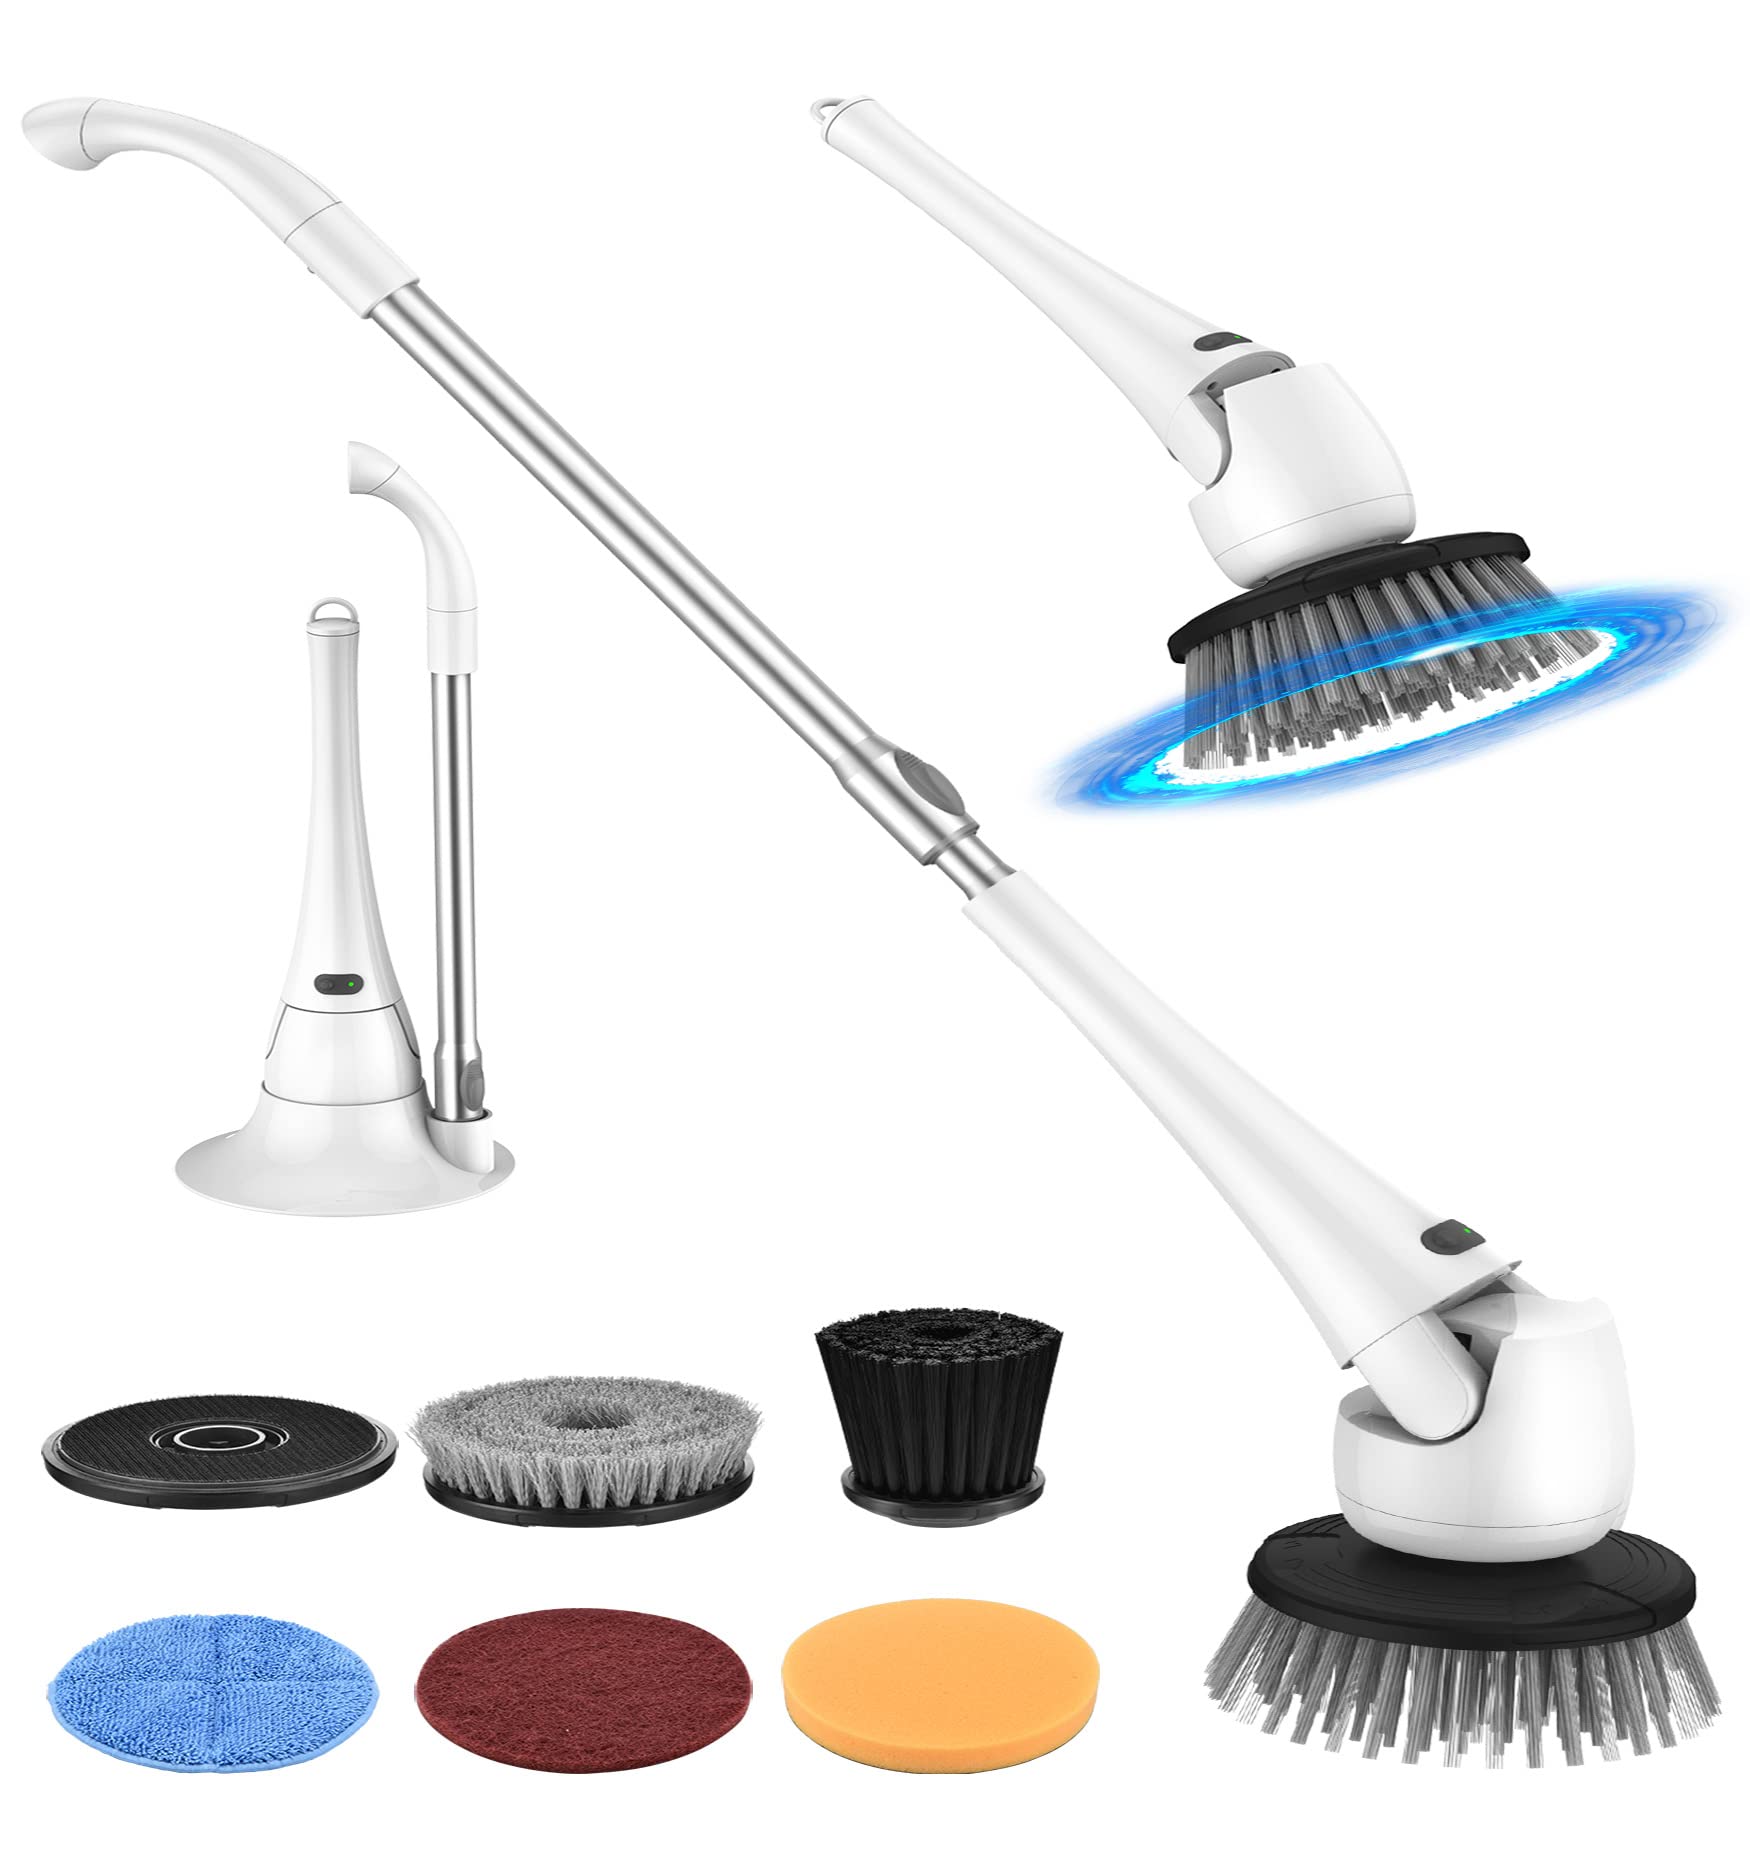 sweepulire Electric Spin Scrubber, Electric Bathroom Scrubber With